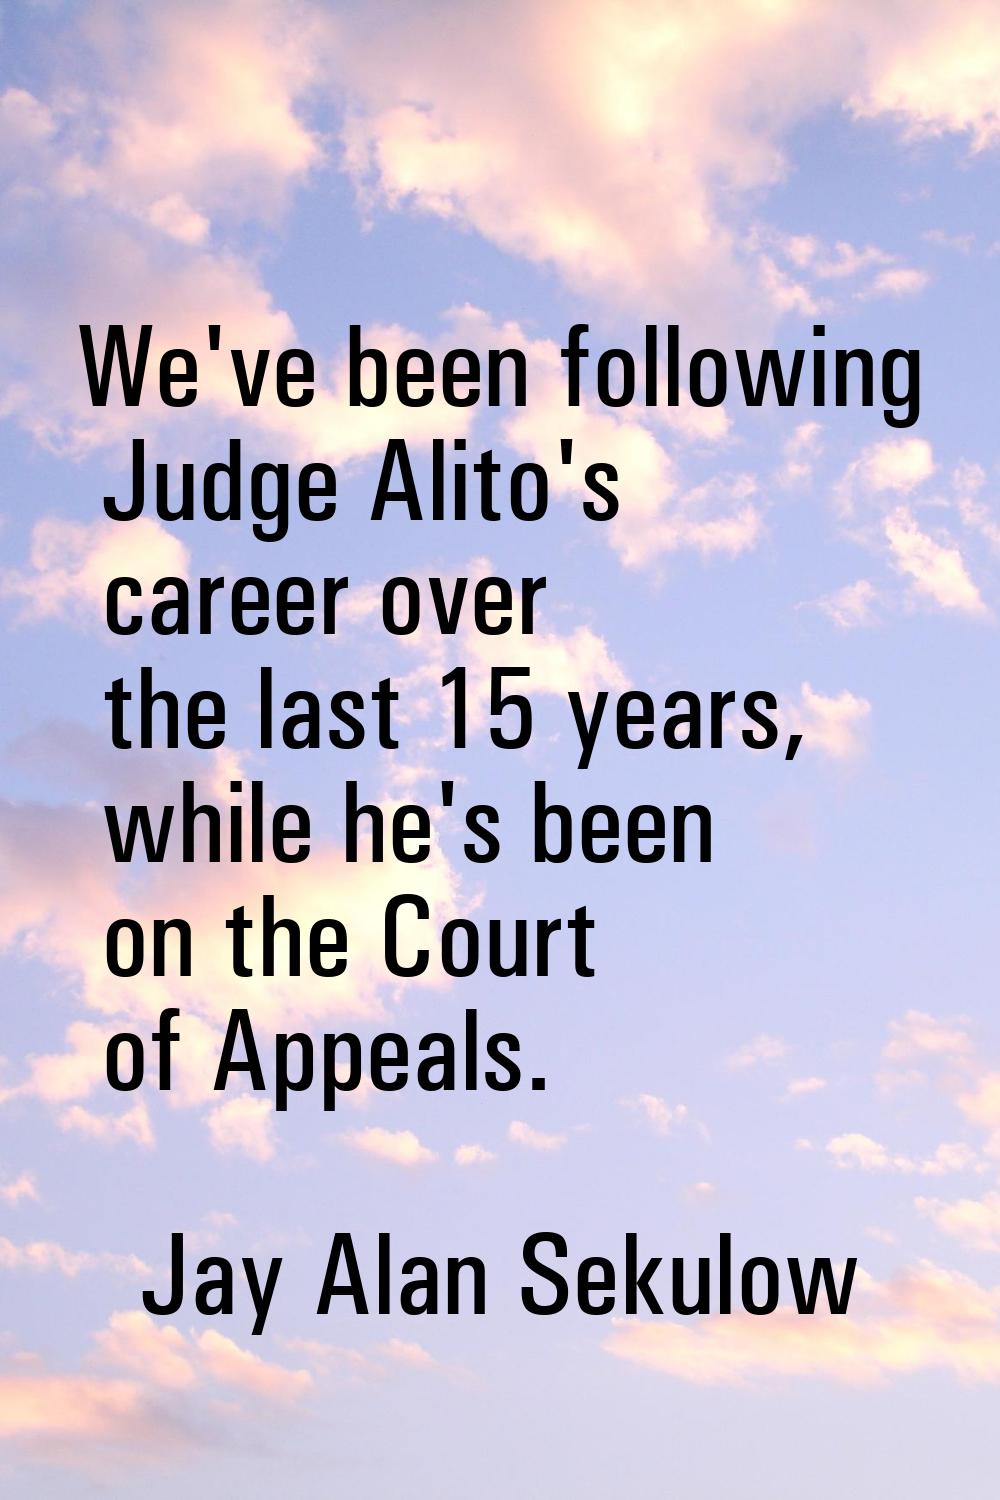 We've been following Judge Alito's career over the last 15 years, while he's been on the Court of A